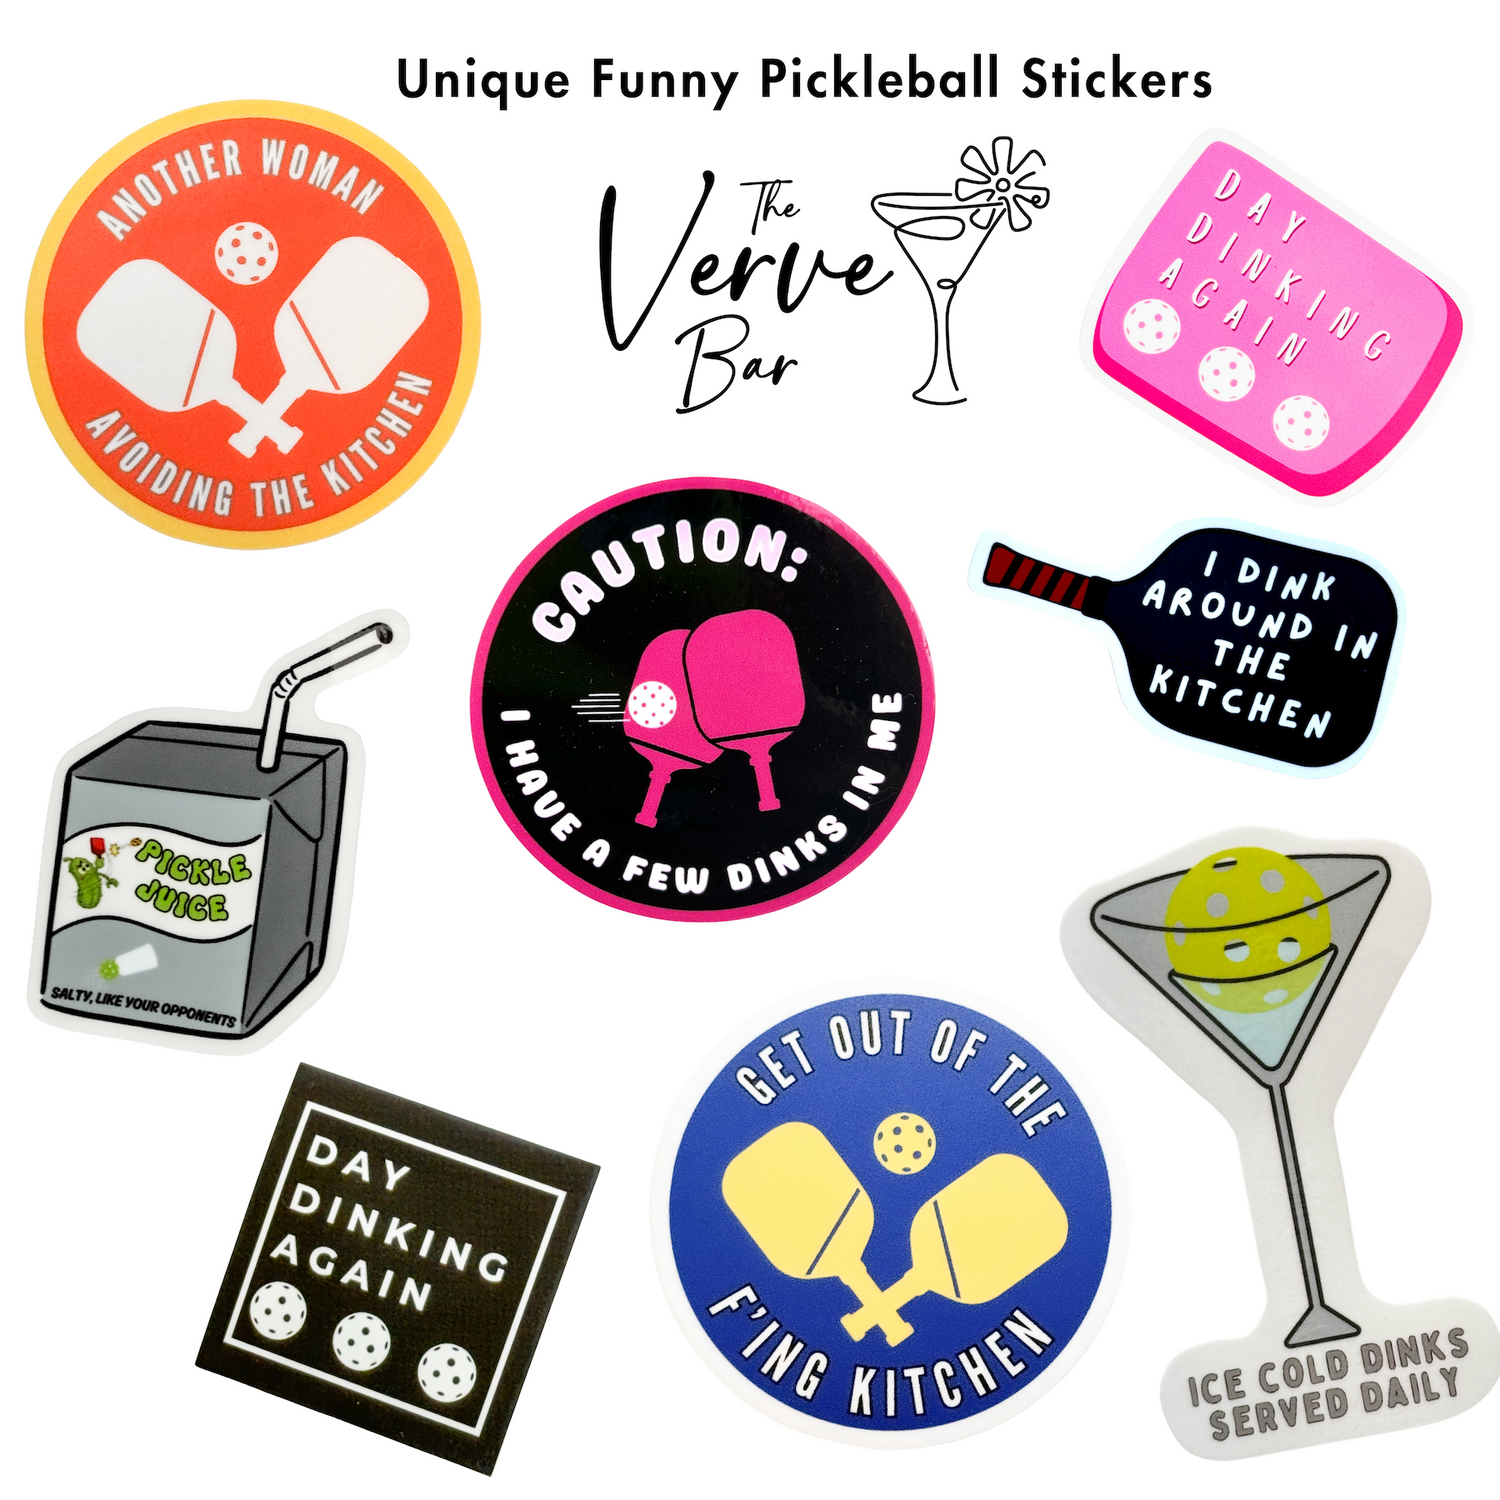 A sample of the huge selection of the best Pickleball stickers from The Verve Bar